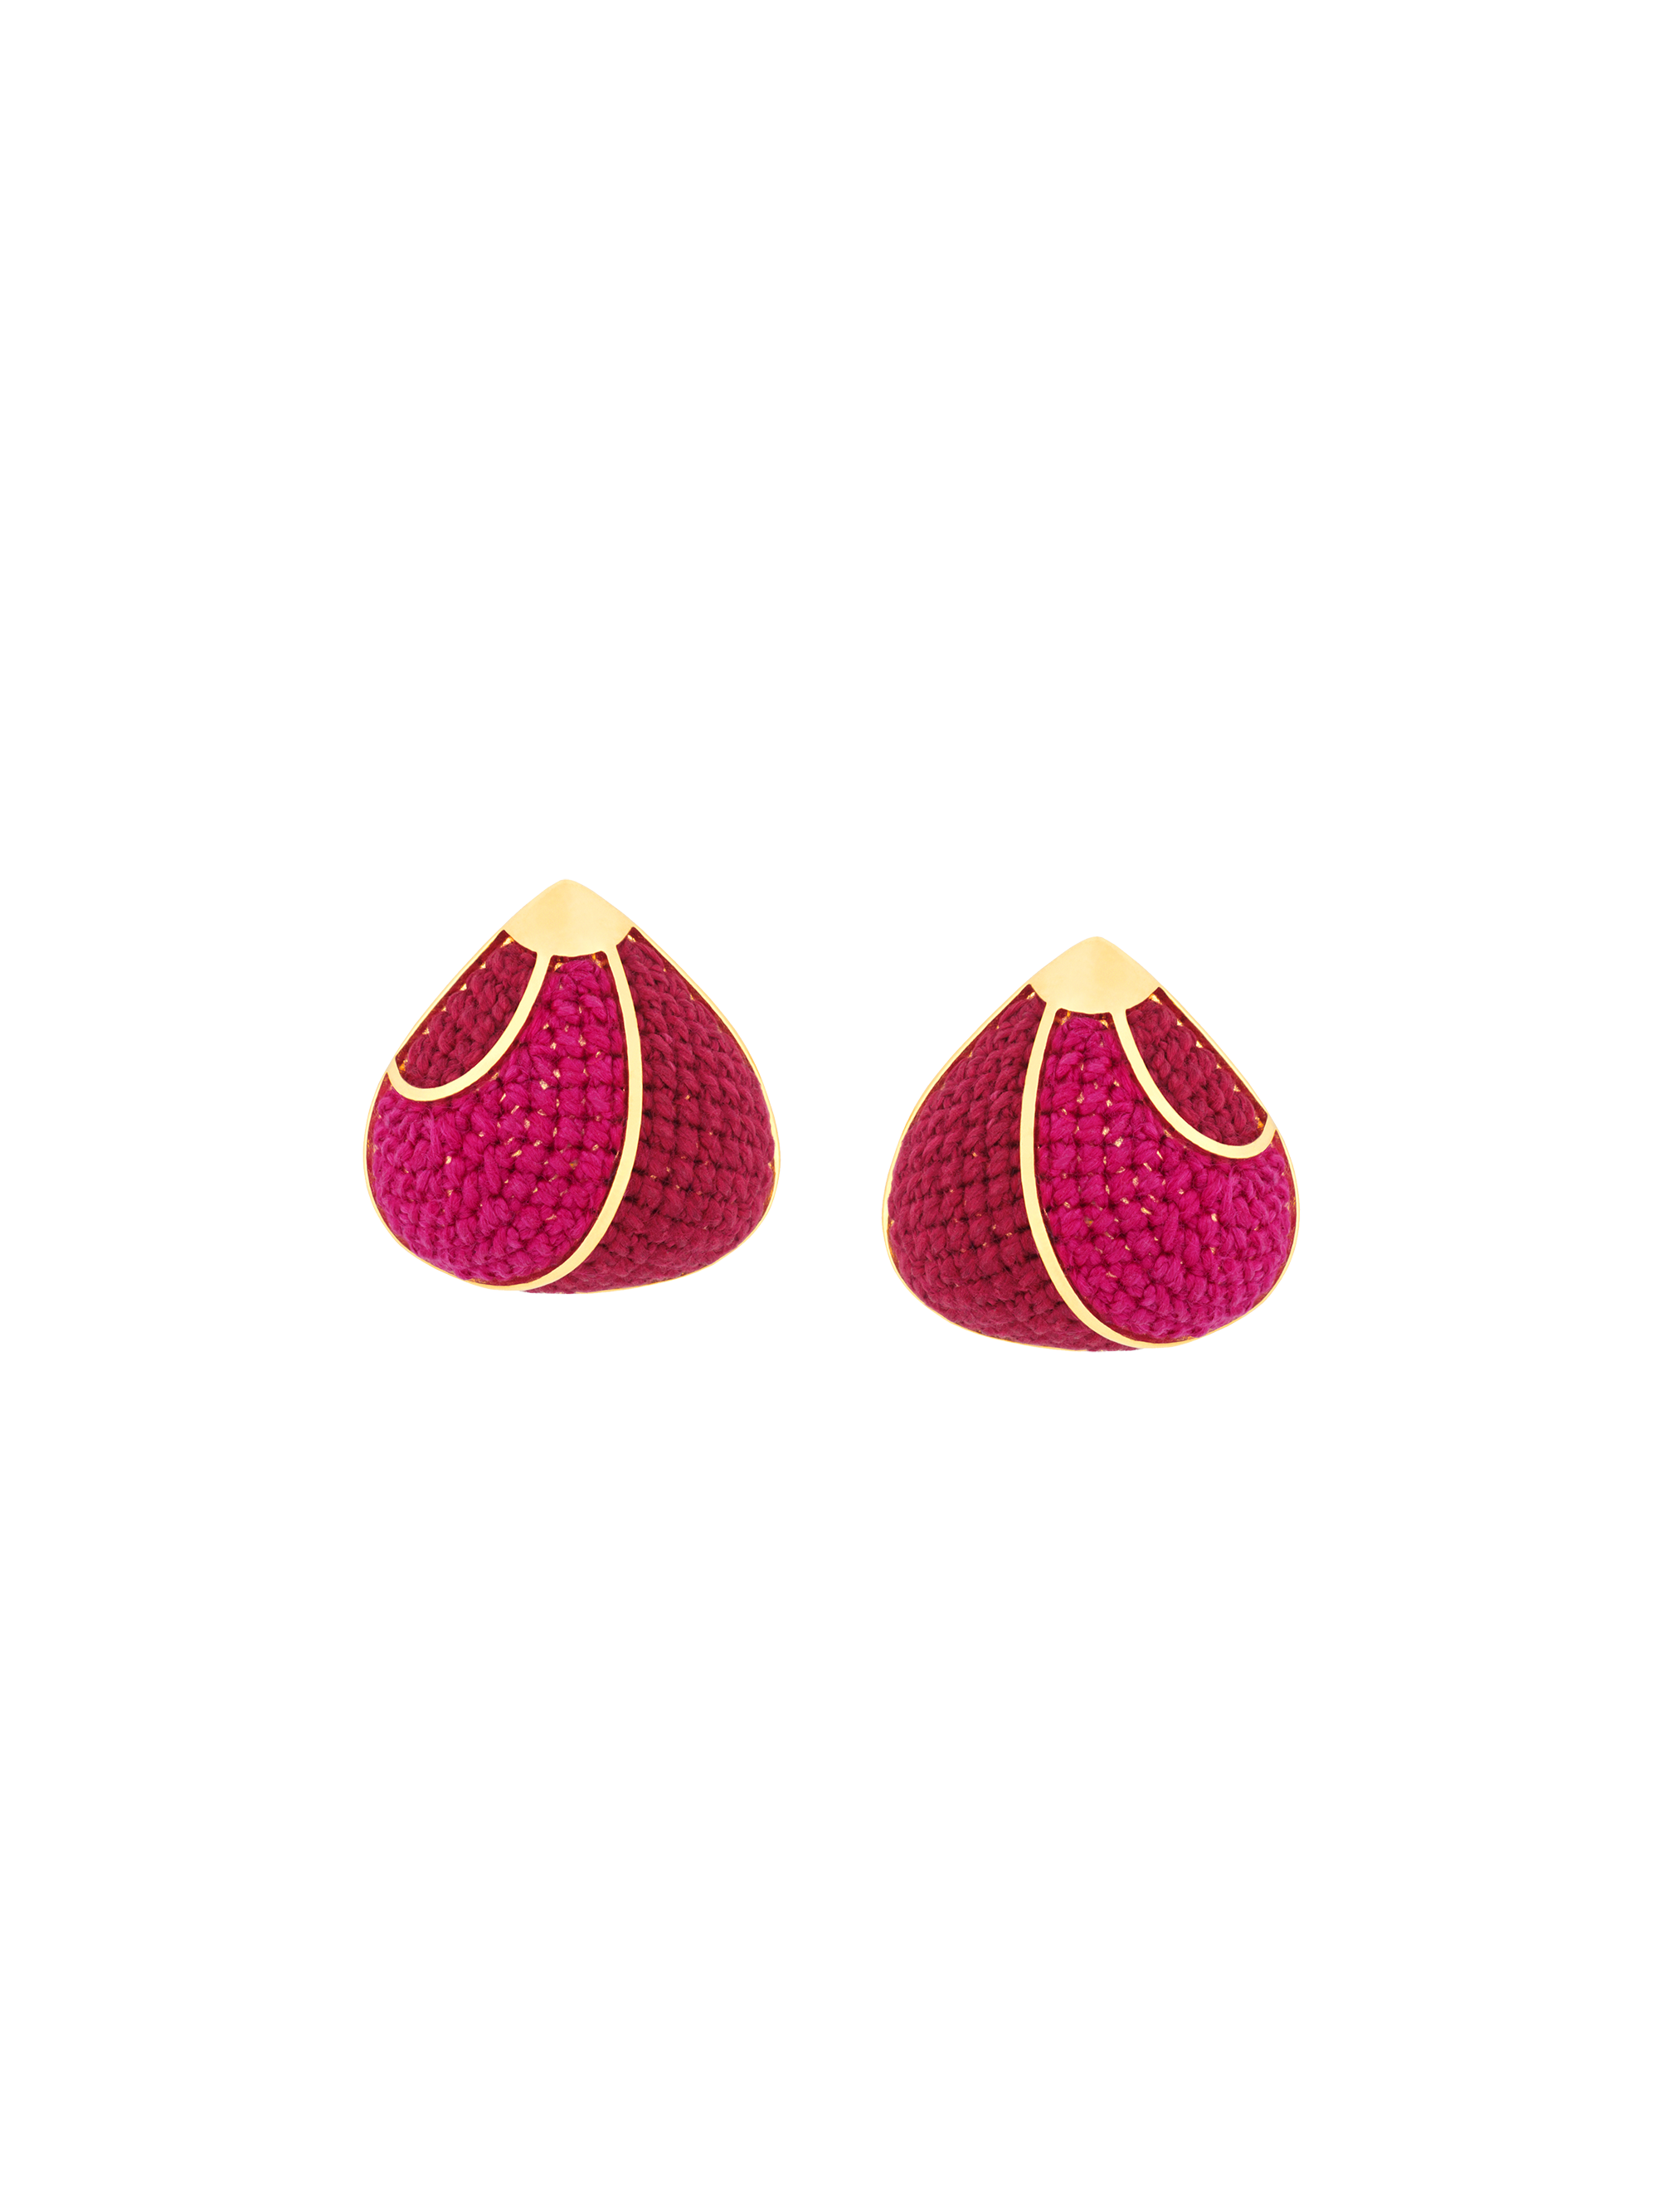 Suspiro Earrings - Red and Pink